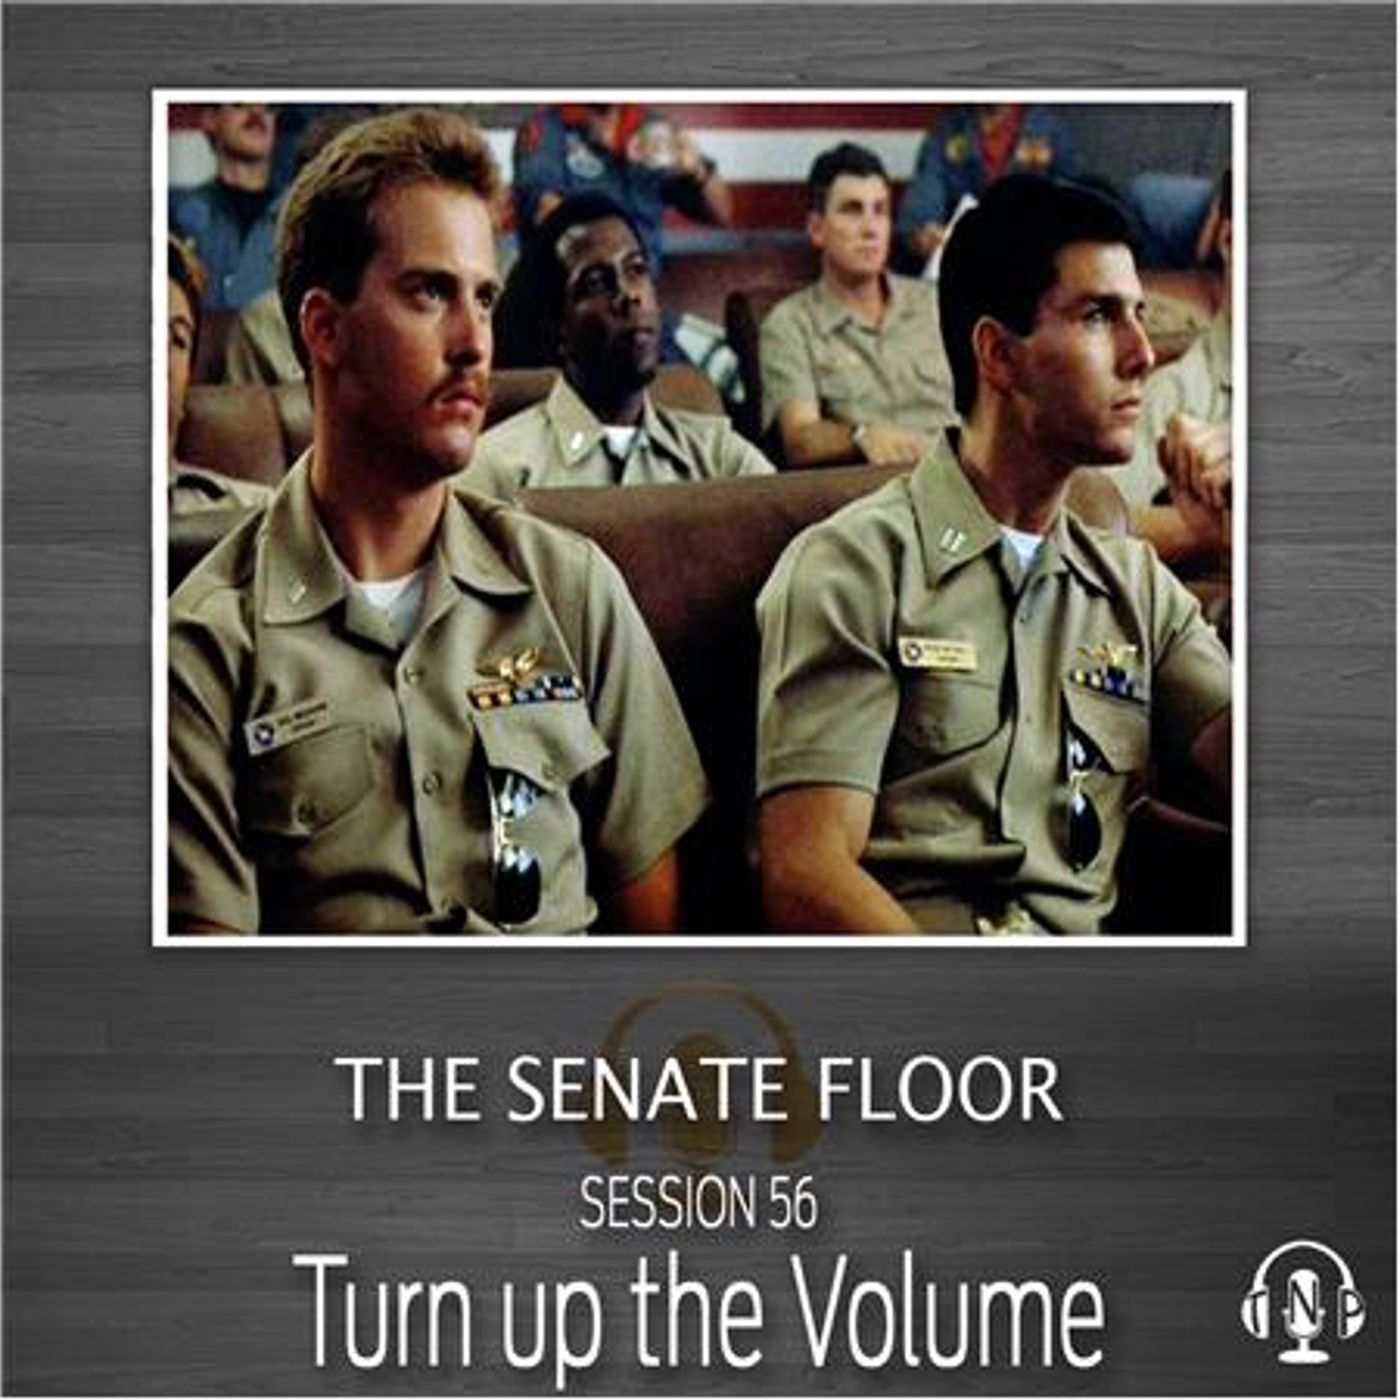 Session 56 - Turn up the Volume